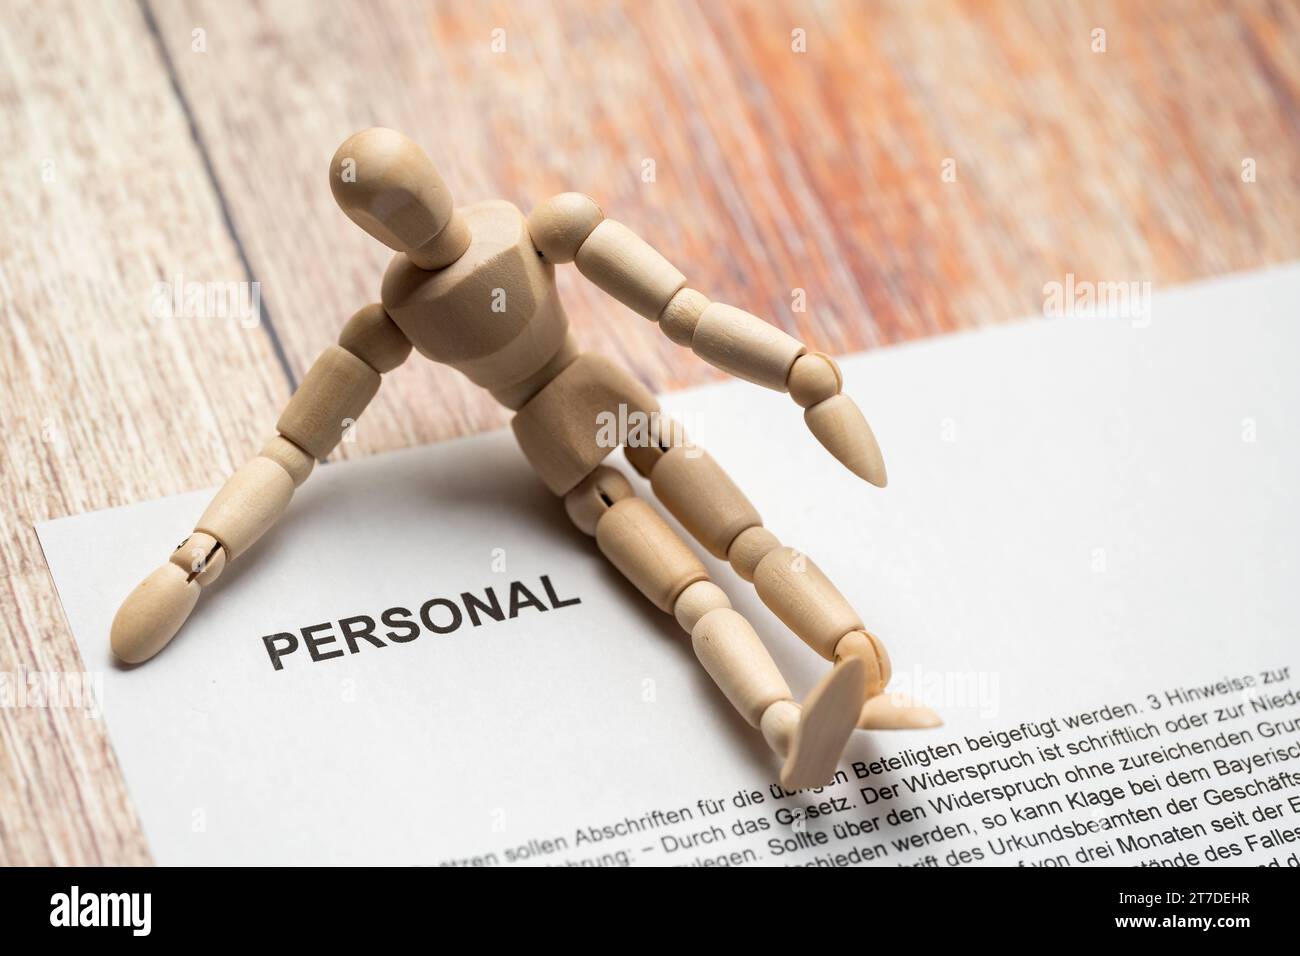 February 25, 2023: Wooden figure on a document with the inscription Personal *** Holzfigur auf einem Dokument mit Aufschrift Personal Credit: Imago/Alamy Live News Stock Photo